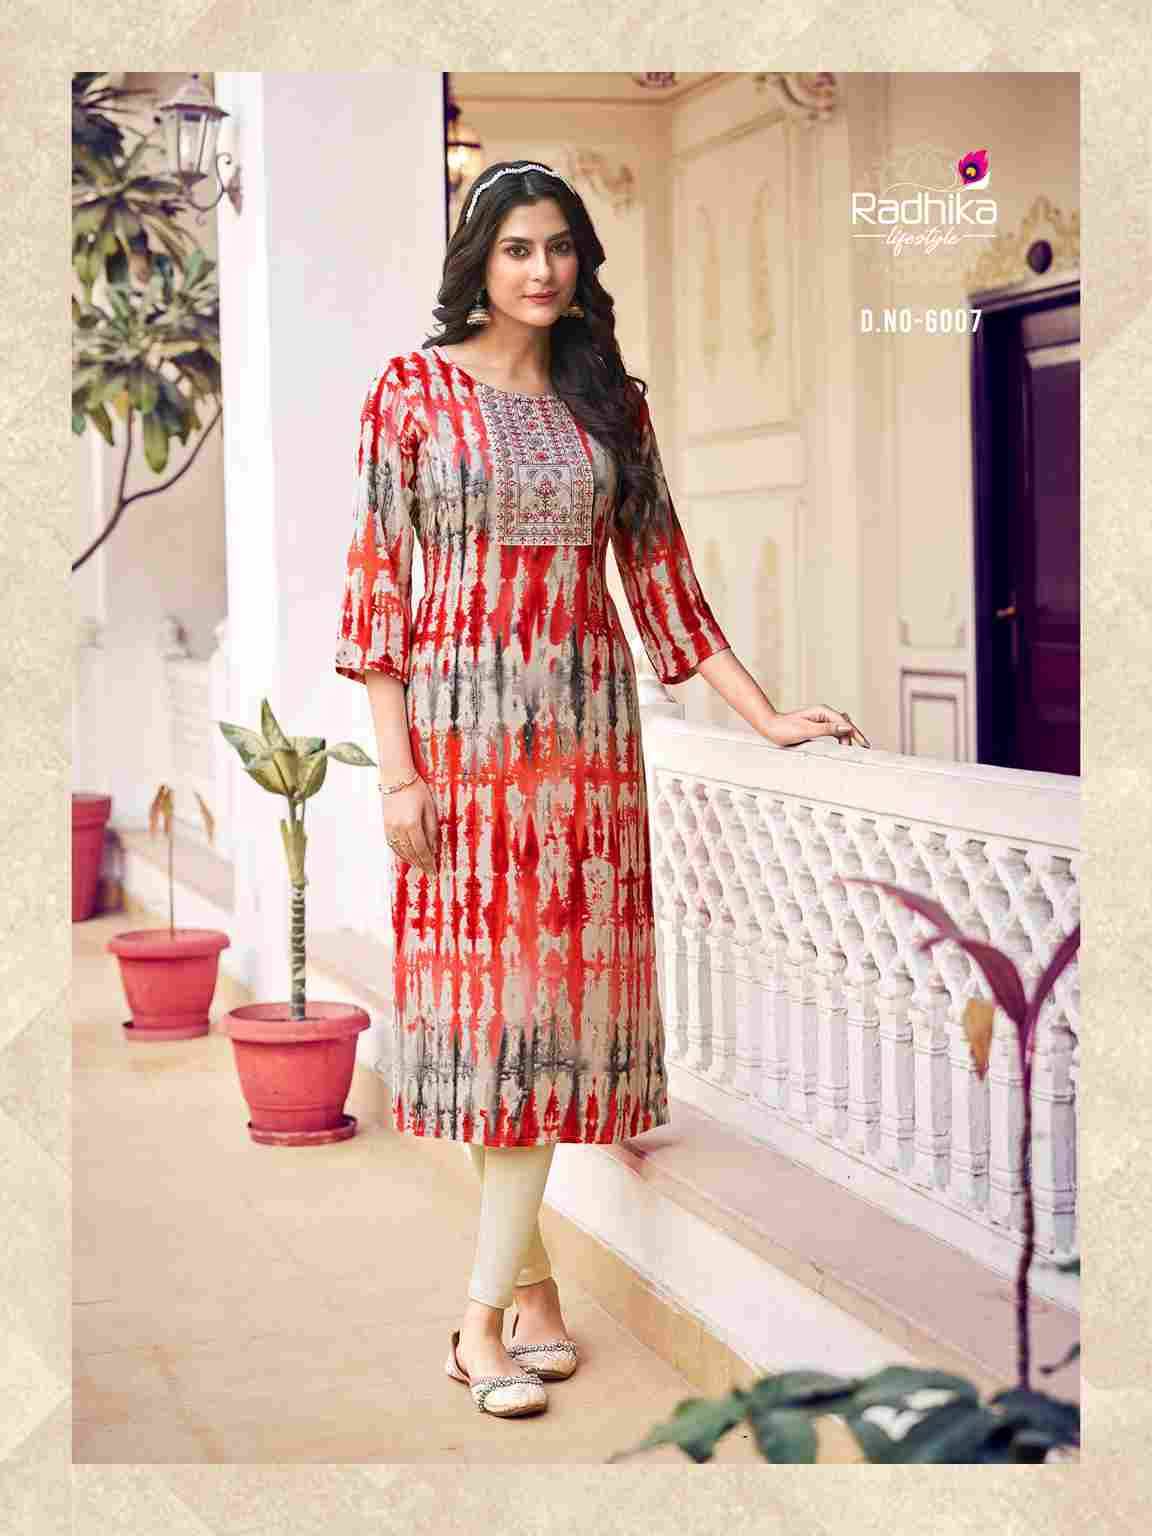 Pahel Vol-6 By Radhika Lifestyle 6001 To 6008 Series Designer Stylish Fancy Colorful Beautiful Party Wear & Ethnic Wear Collection Rayon Print Kurtis At Wholesale Price